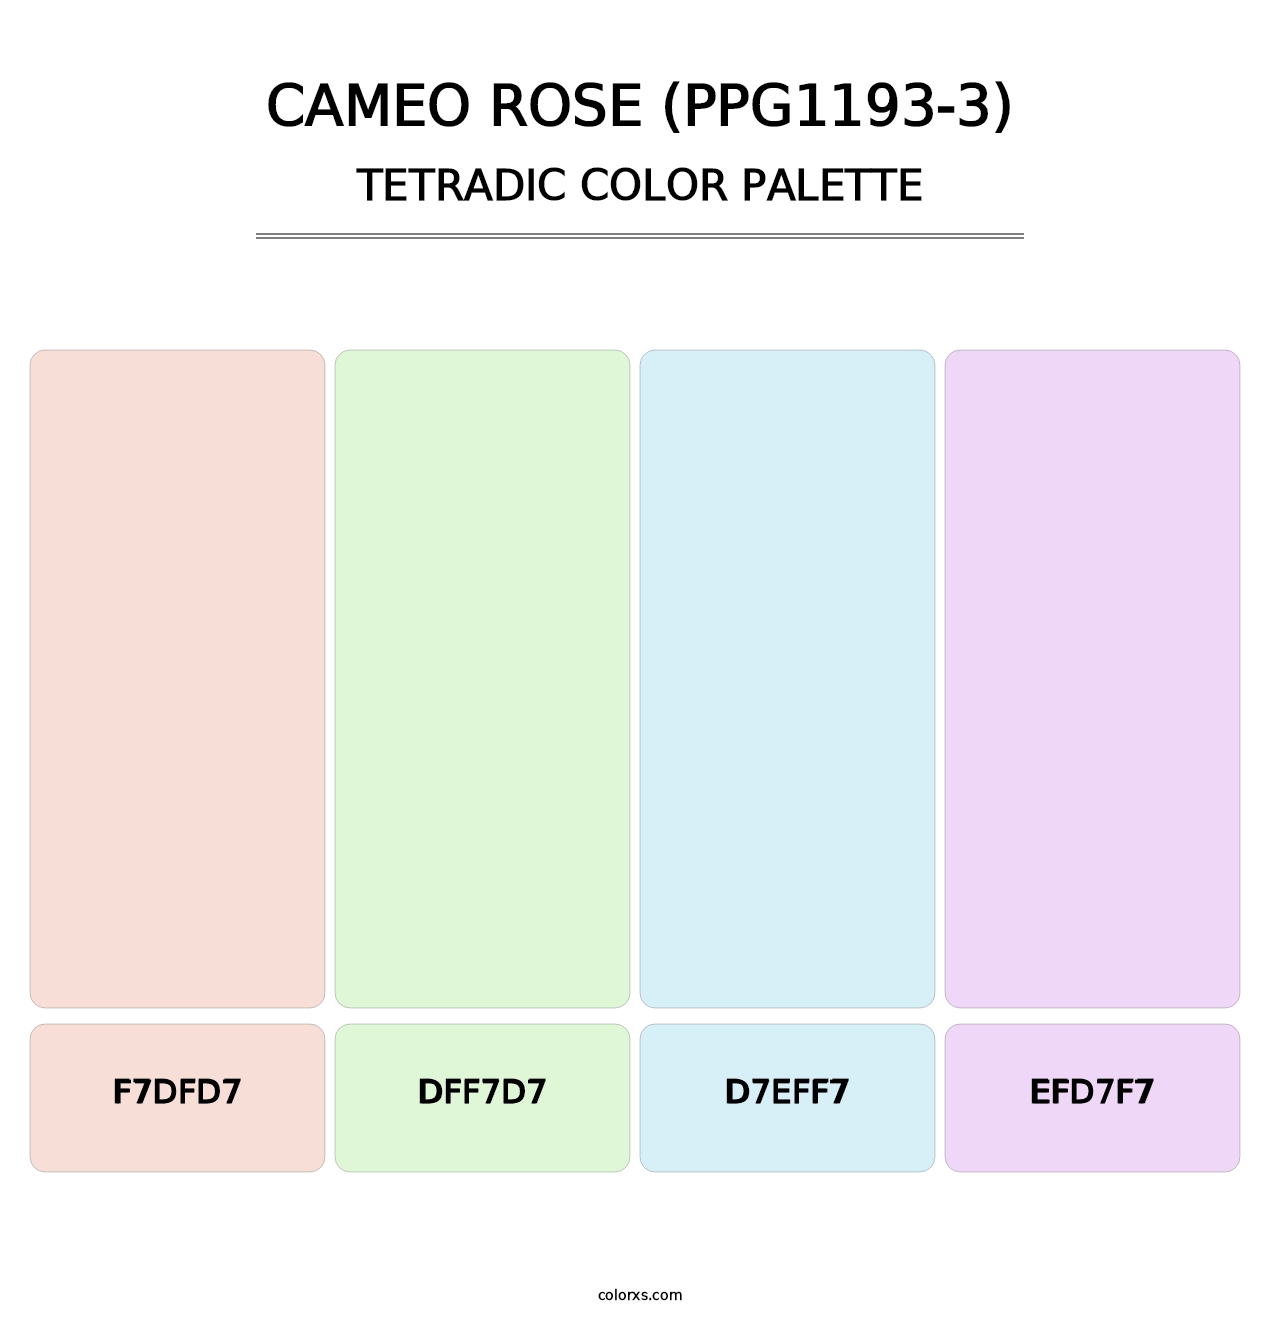 Cameo Rose (PPG1193-3) - Tetradic Color Palette